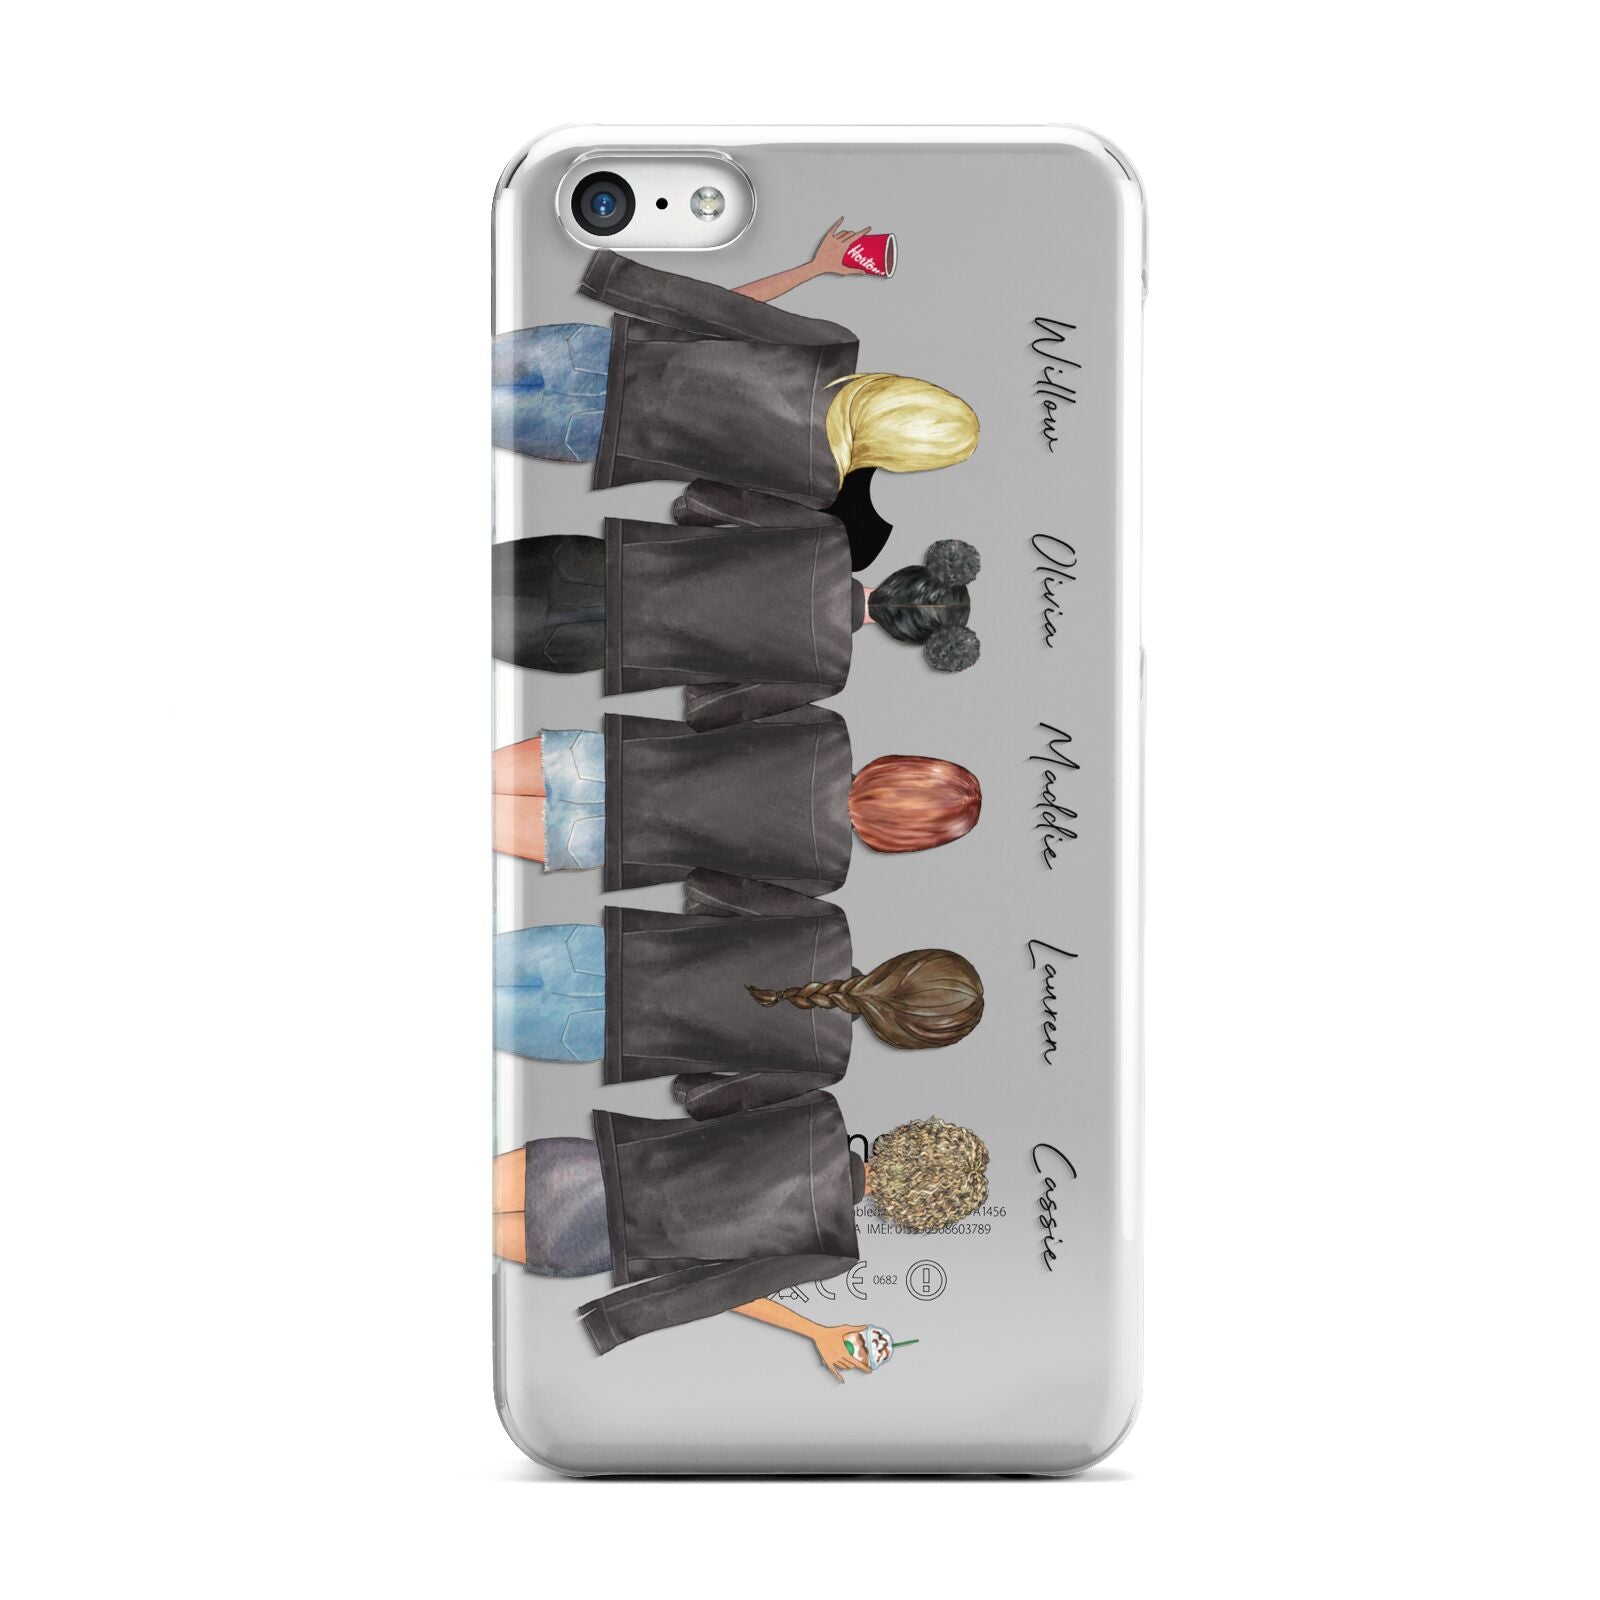 5 Best Friends with Names Apple iPhone 5c Case